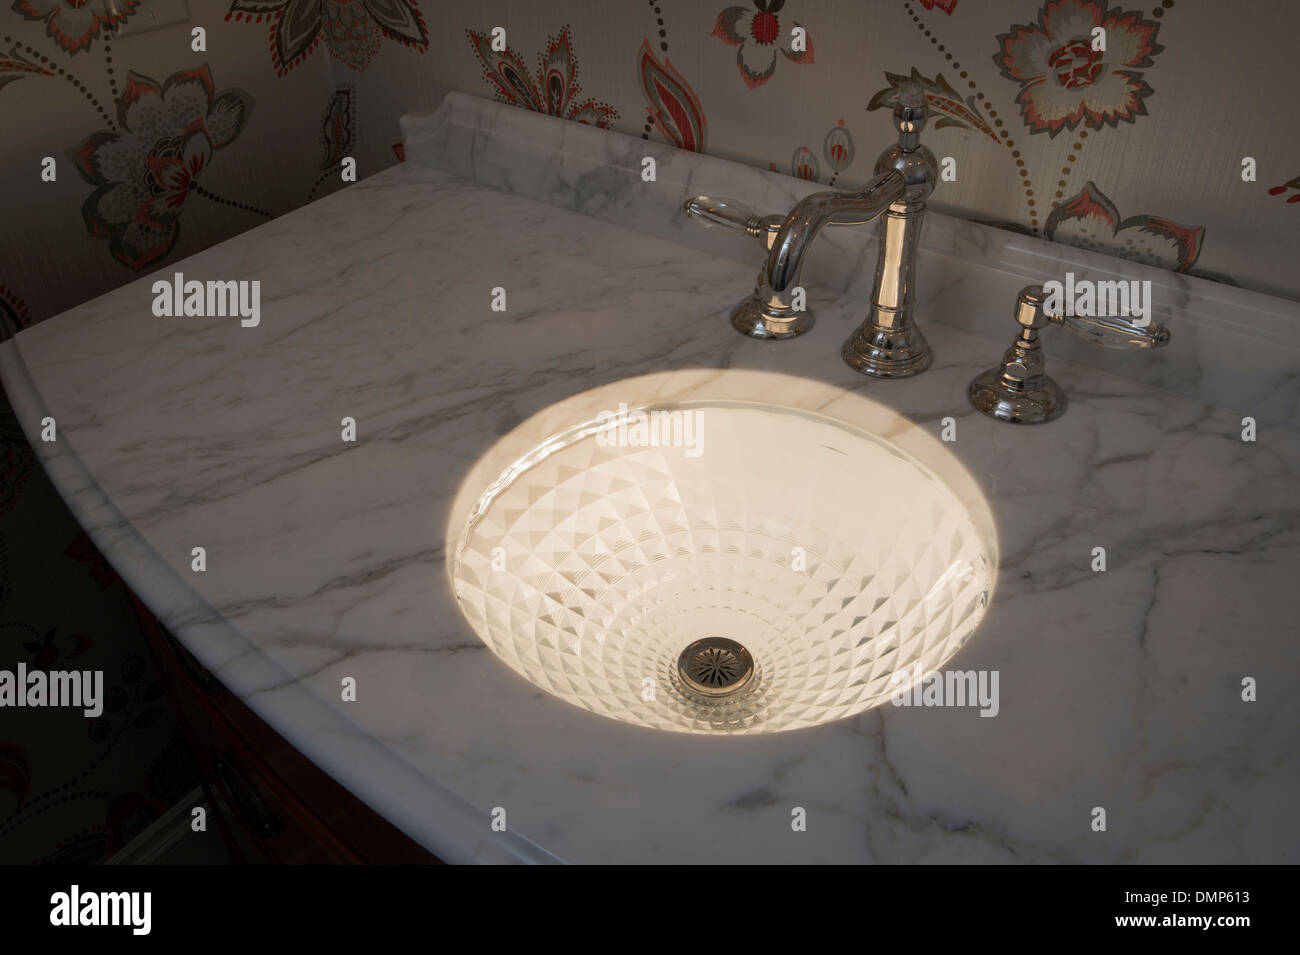 Illuminated Crystal Bathroom Sink With White Marble Counter Stock Photo